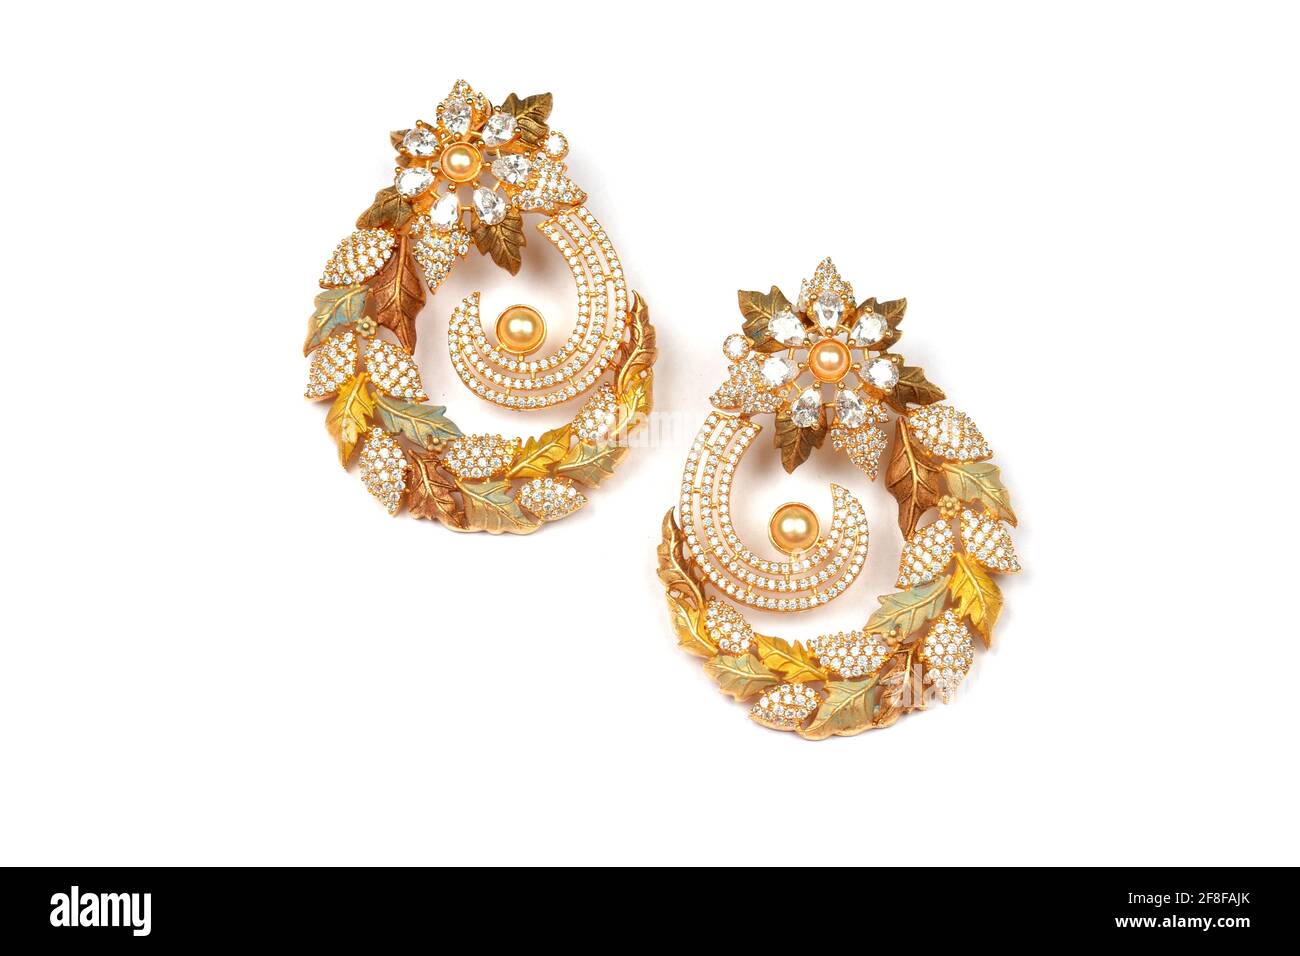 Glamorous antique Golden pair of earrings on white background Indian traditional jewellery, Bridal Gold earrings wedding jewellery, Vintage earrings Stock Photo